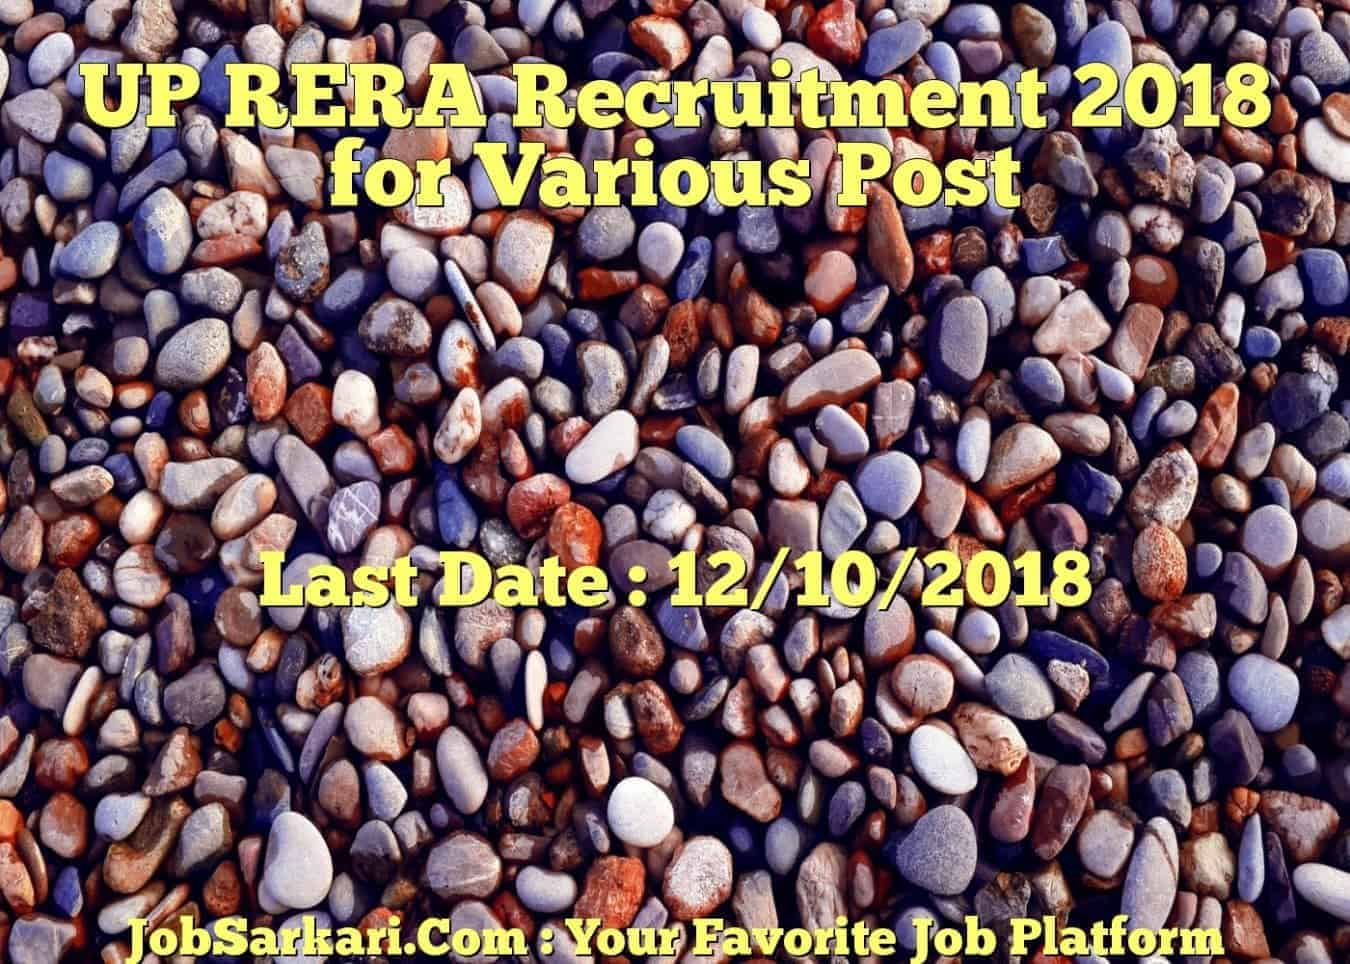 UP RERA Recruitment 2018 for Various Post